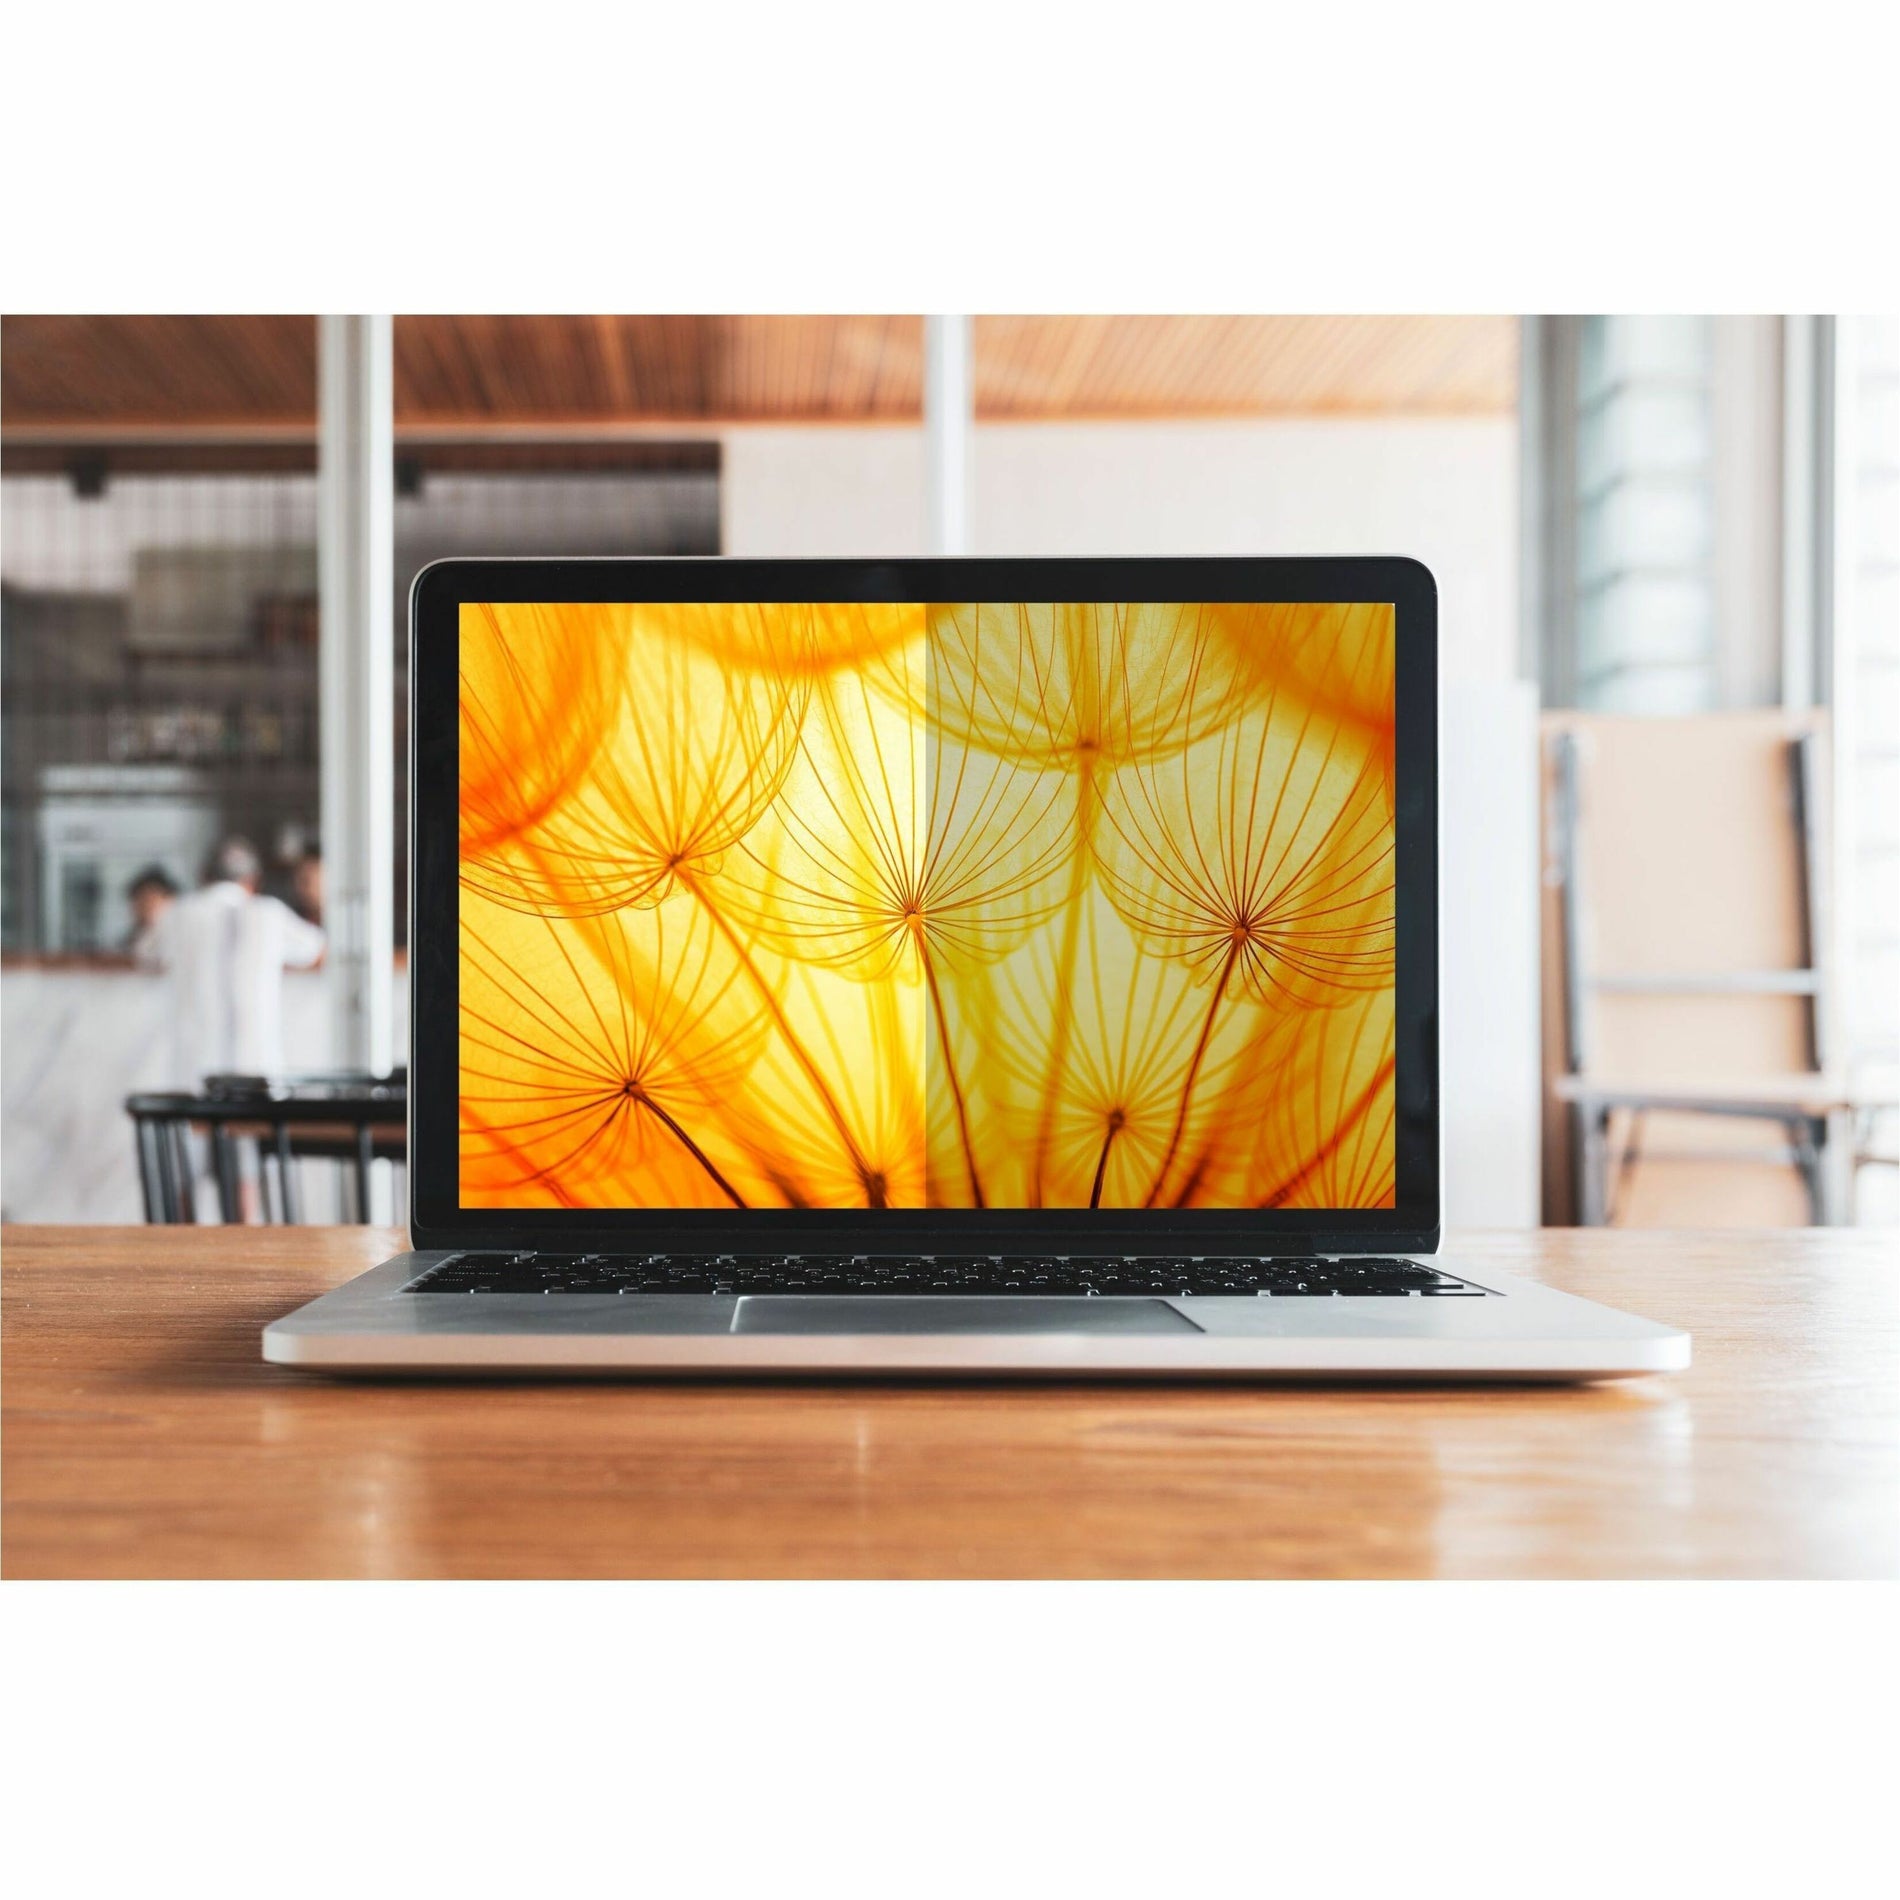 3M BPNDE003 Bright Screen Privacy Filter for Dell Multi-line Laptops 15.6in, 16:10, Reversible Matte-to-Glossy, Blue Light Reduction